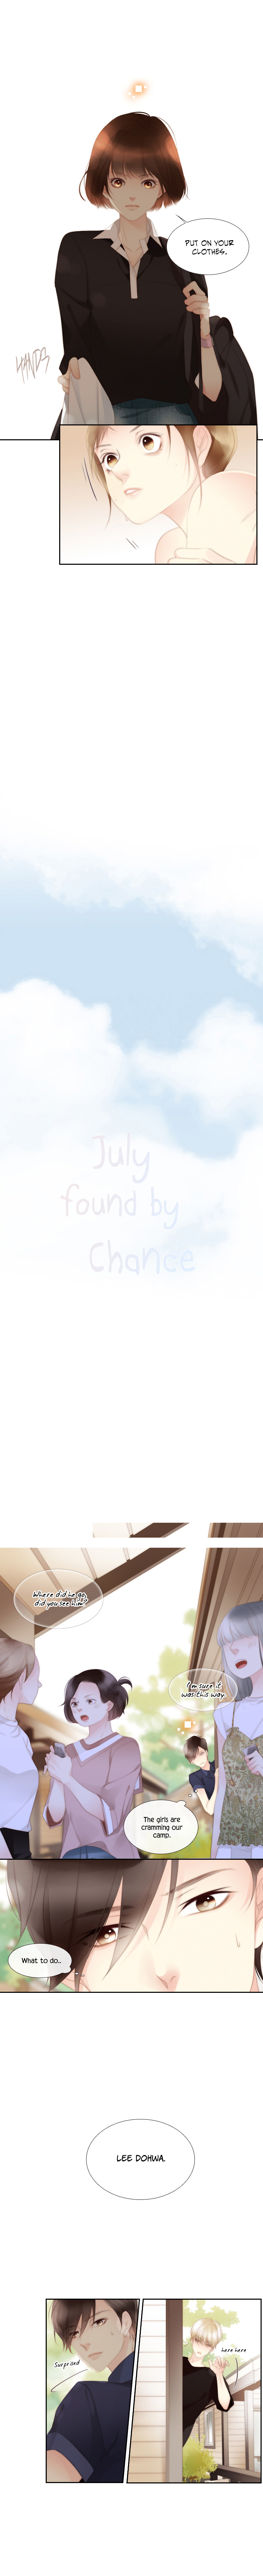 July Found by Chance Ch. 13 Fate 1